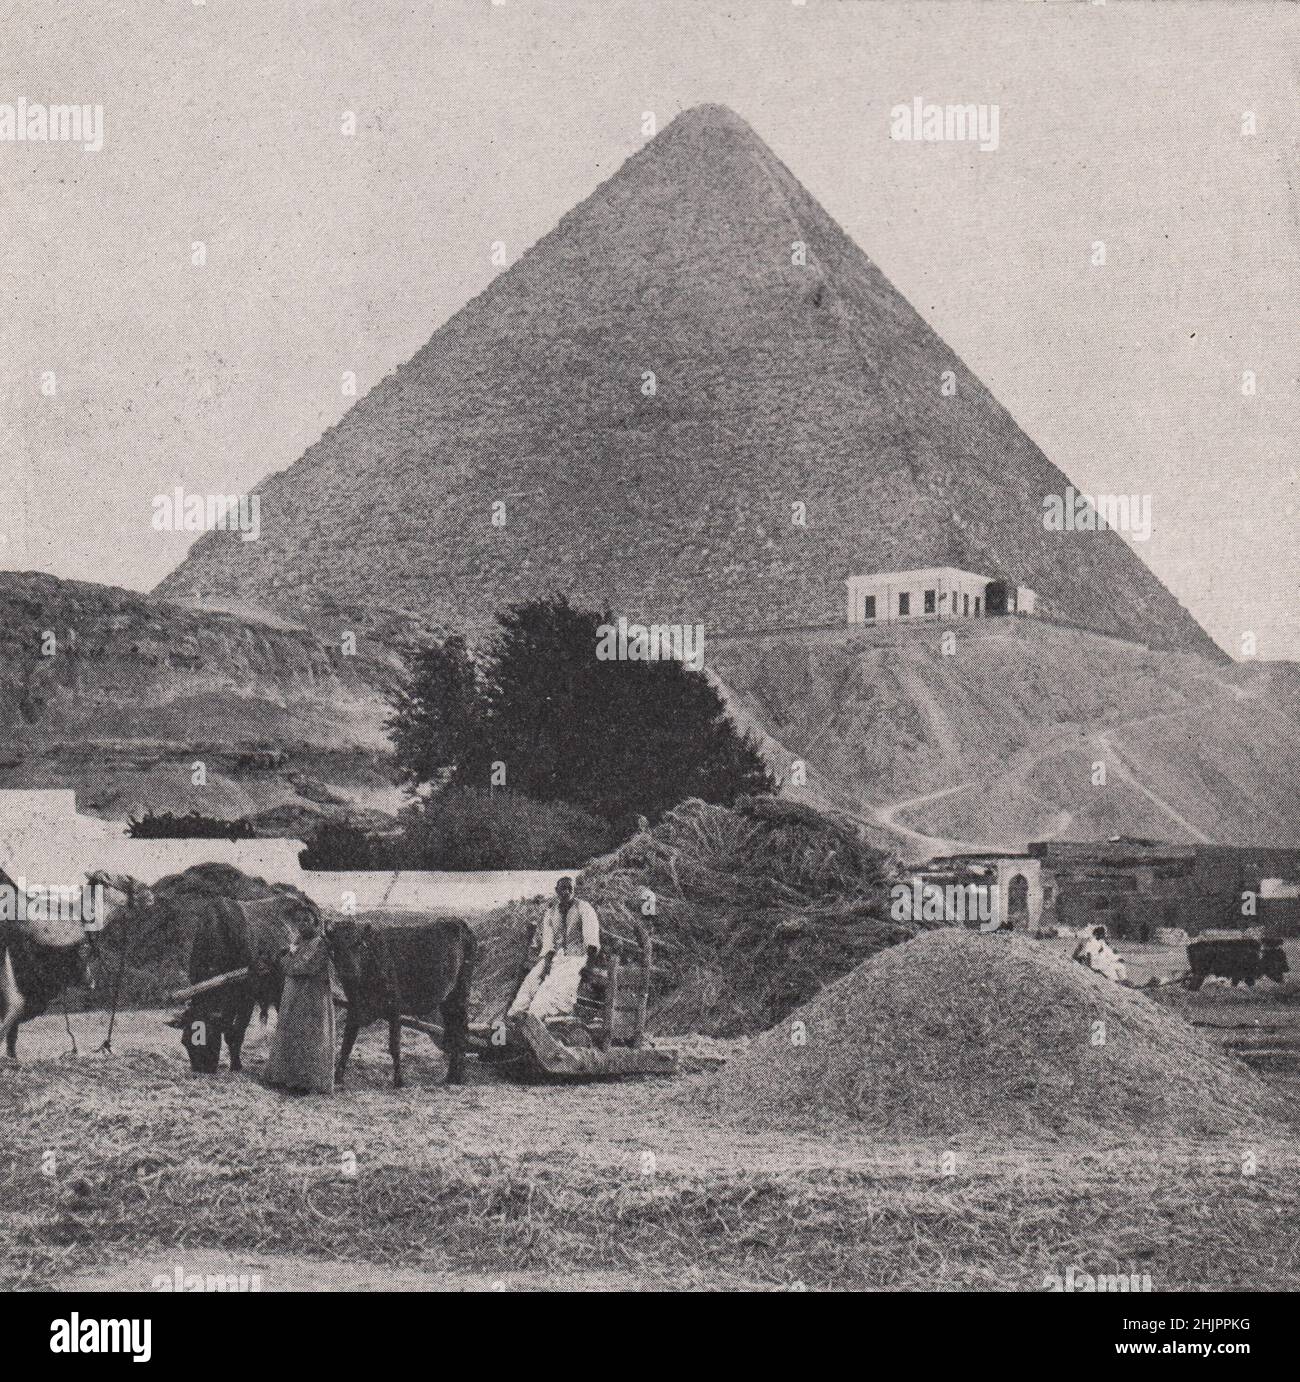 Old Monument and methods of the Unchanging East. Egypt. Cairo (1923) Stock Photo